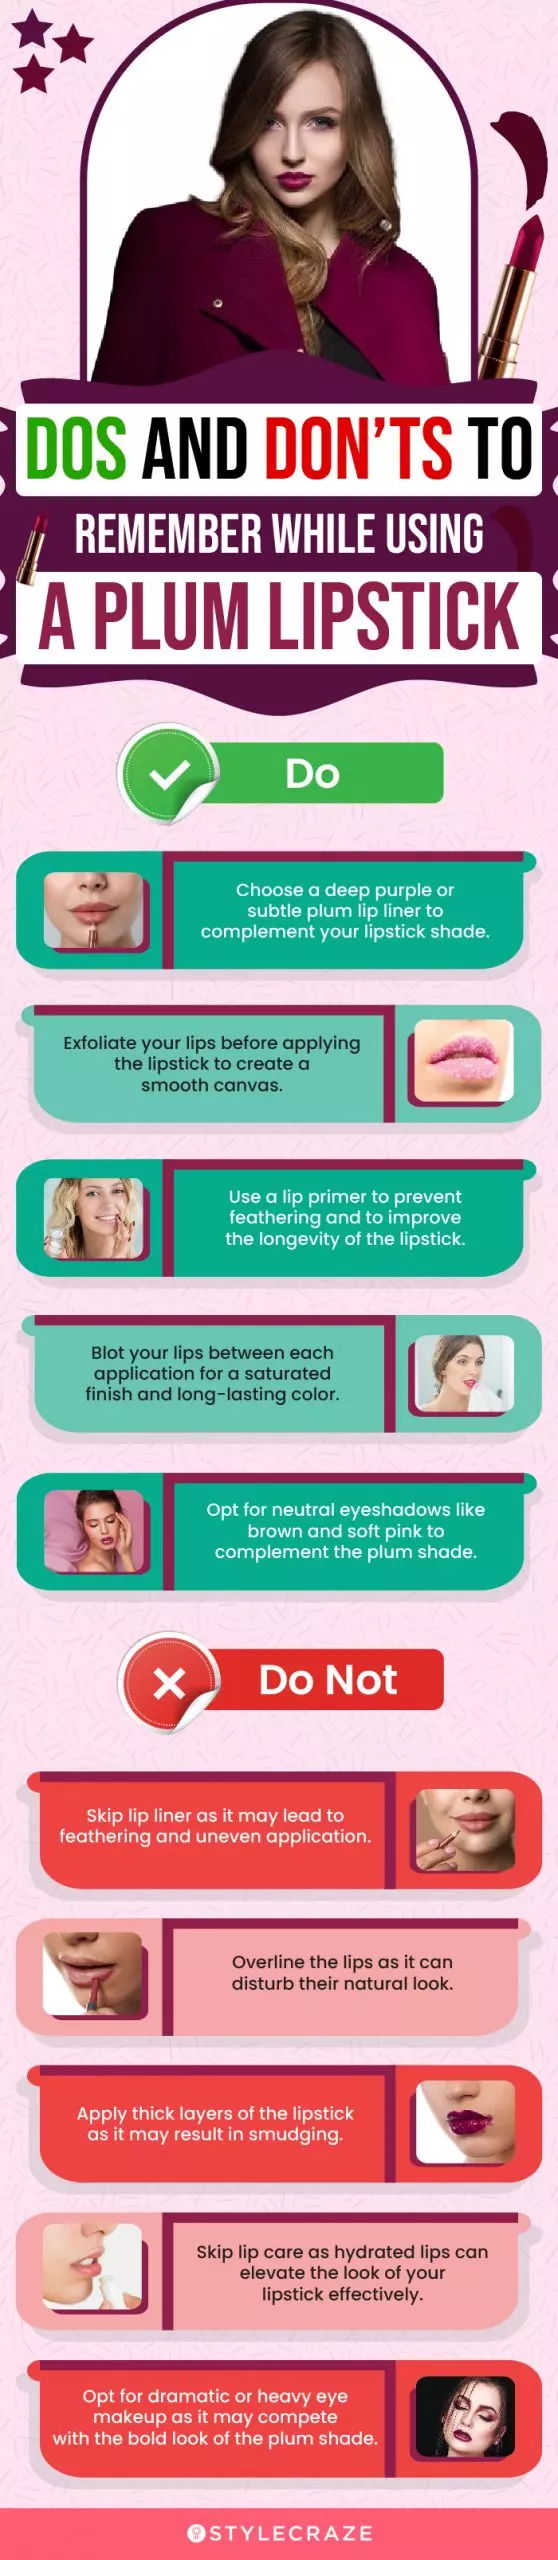 Dos And Don’ts To Remember While Using A Plum Lipstick (infographic)